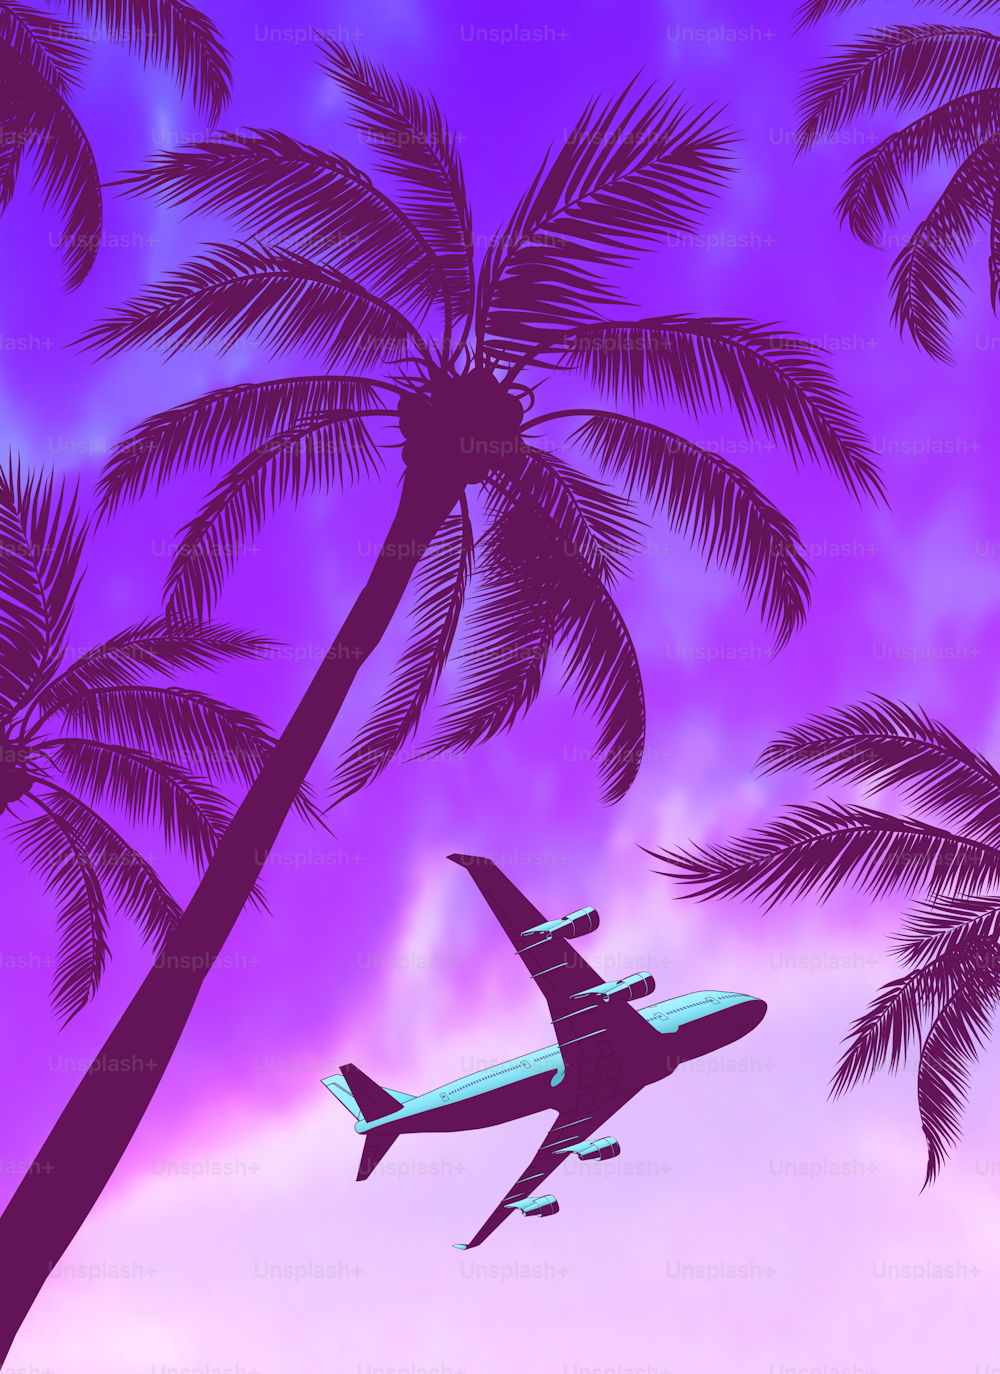 Passenger airplane over palm trees with beautiful blue green yellow sunset. Vector illustration.